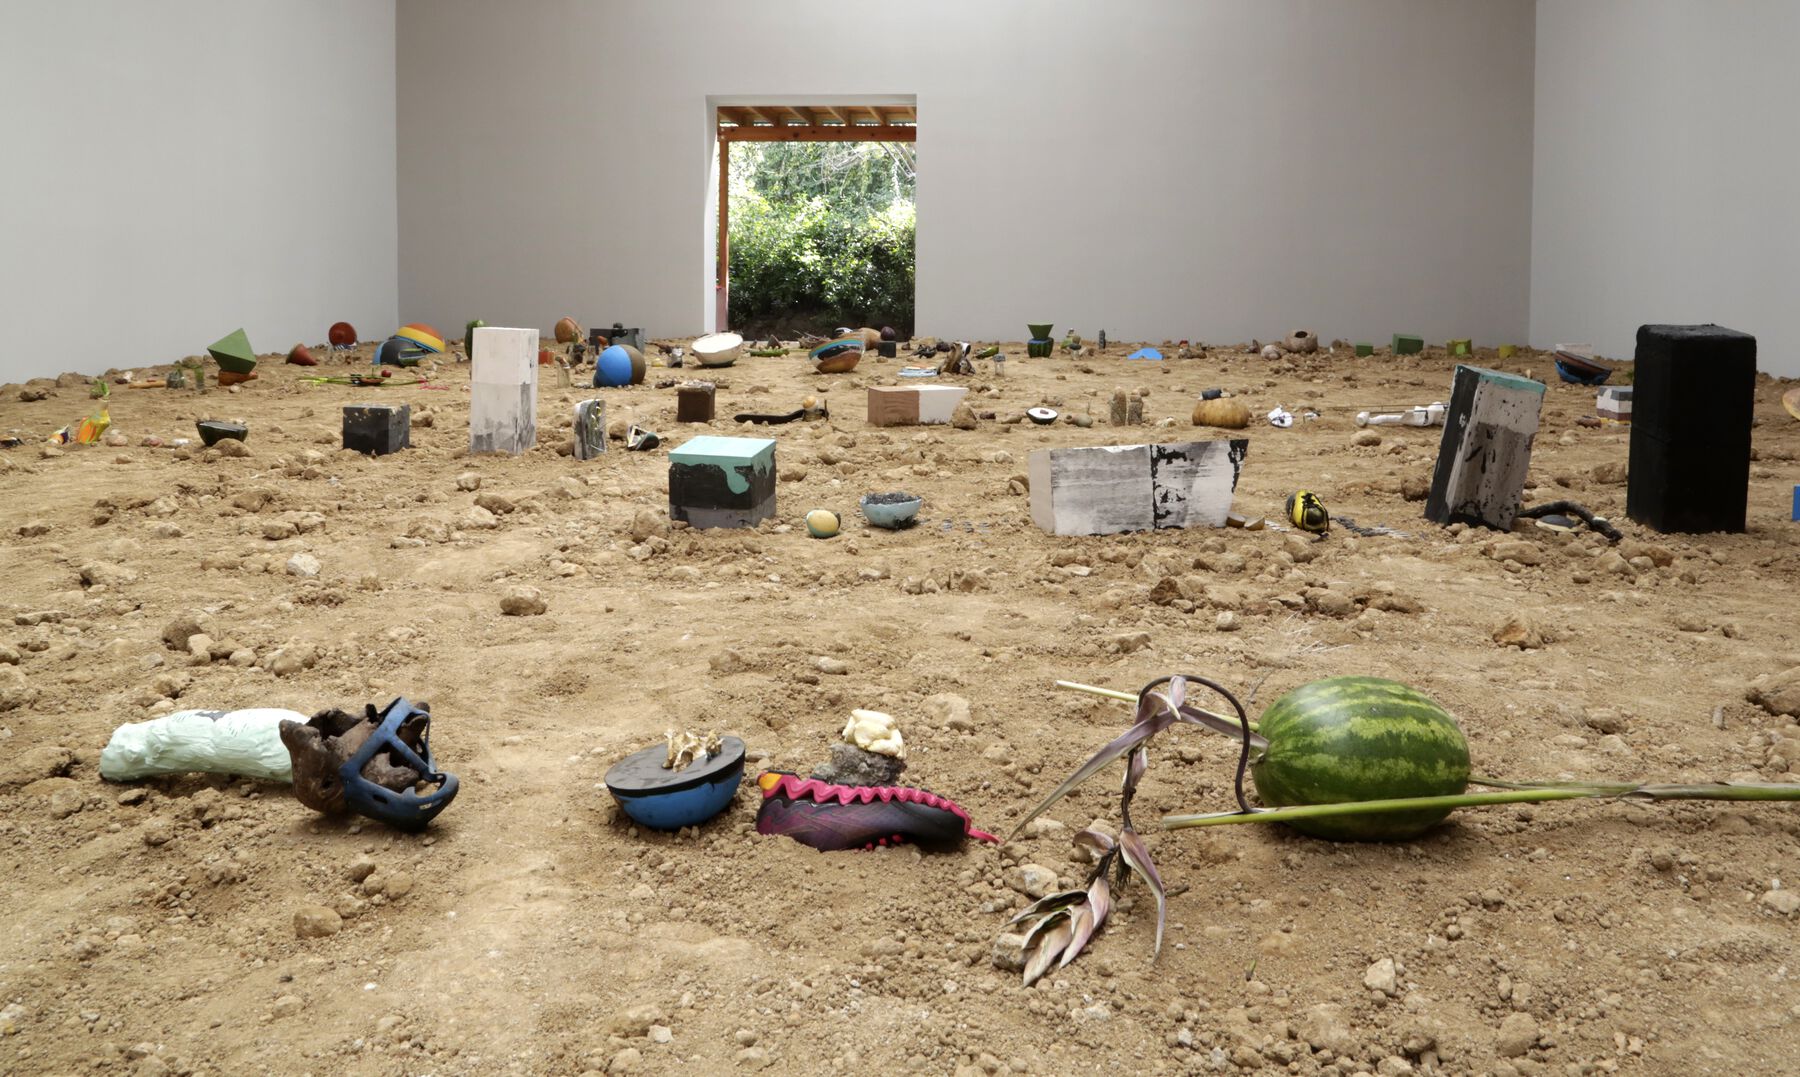 Various objects, including watermelon, plaster blocks, and pottery, buried in sand; the room has a sunlit doorway at other end